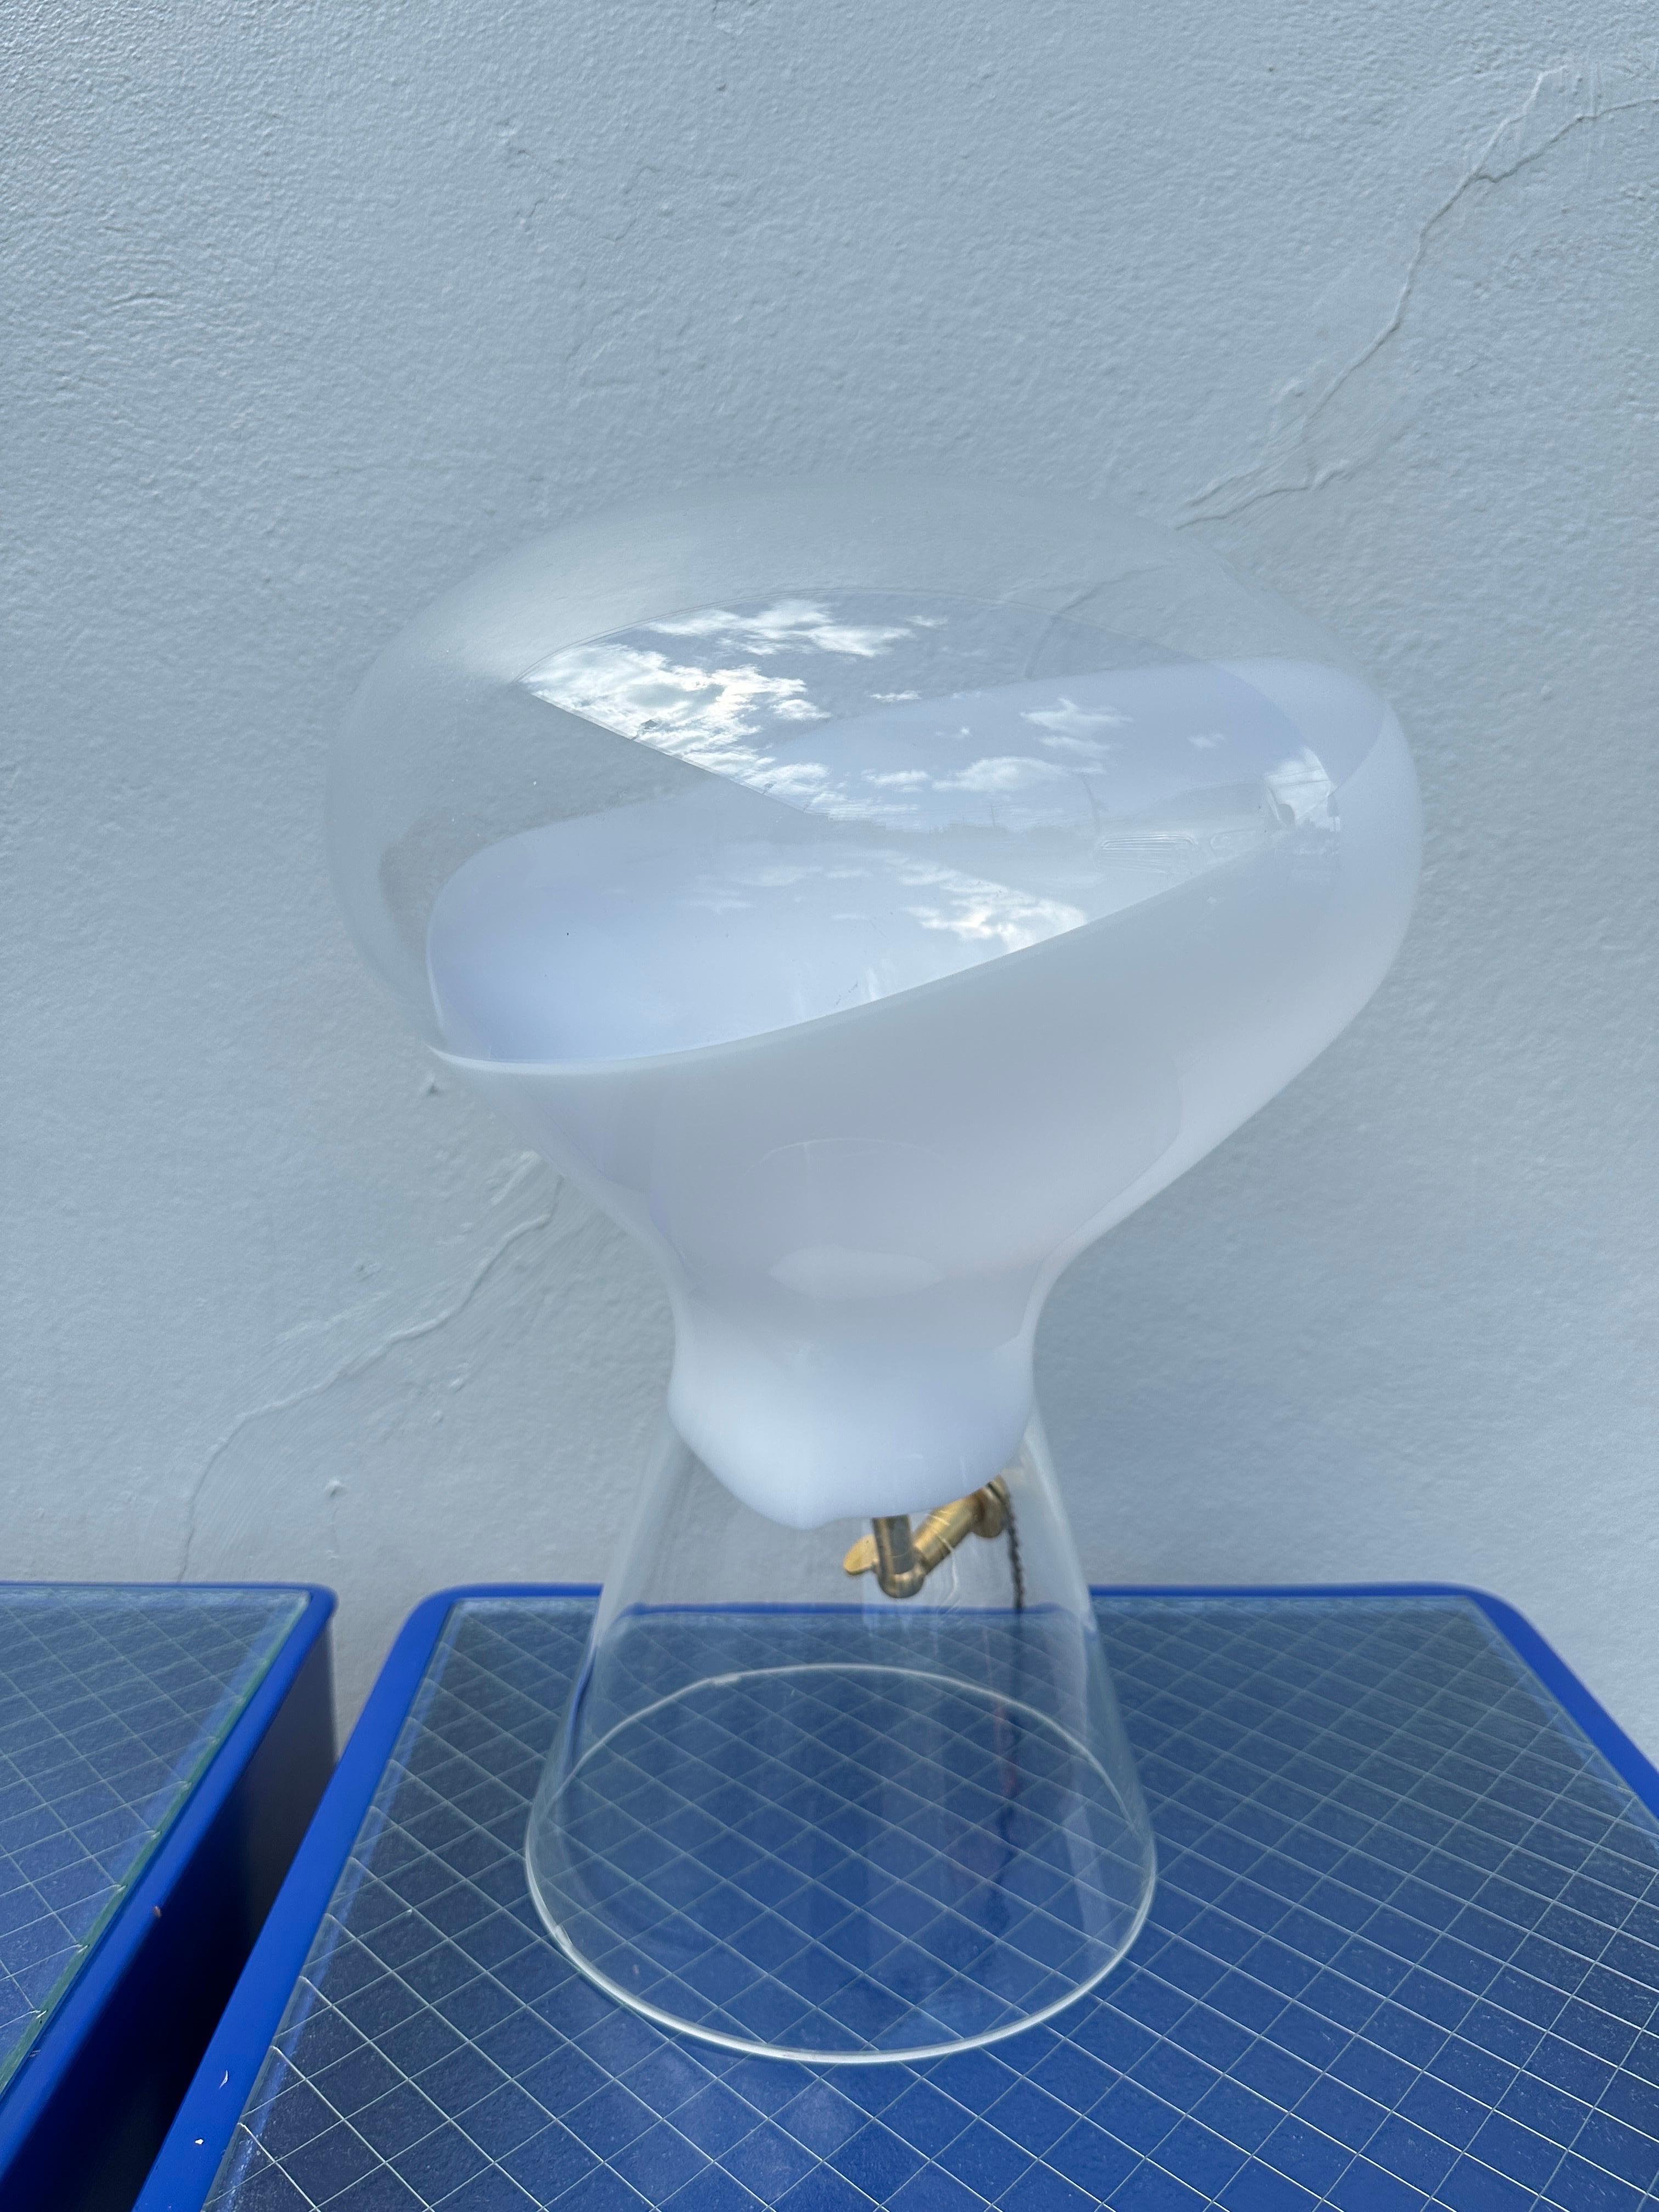 This Cenedese Murano glass lamp is so unique with a bulbous head and flared base. The electrical components are intentionally visible to add an industrial feeling, with new silk wiring. The glass piece itself has a half white and half clear top, so